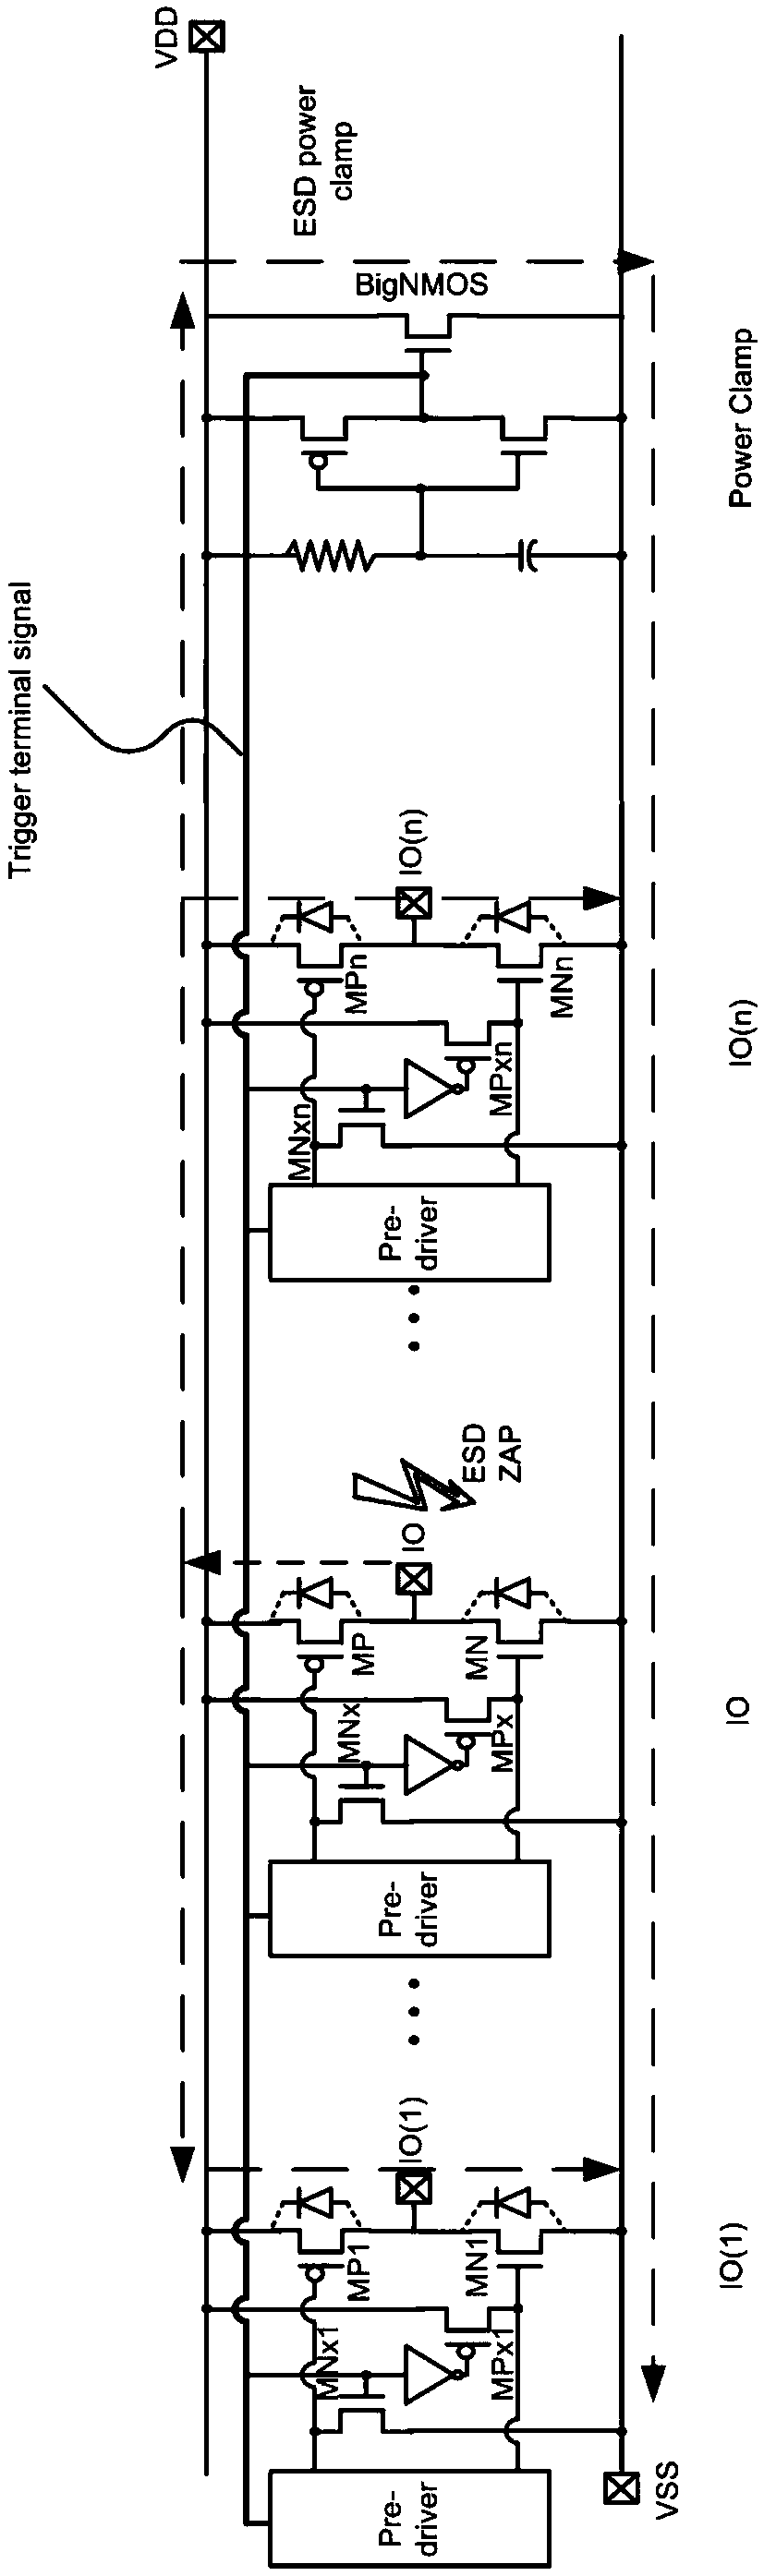 Full-chip electrostatic discharge network